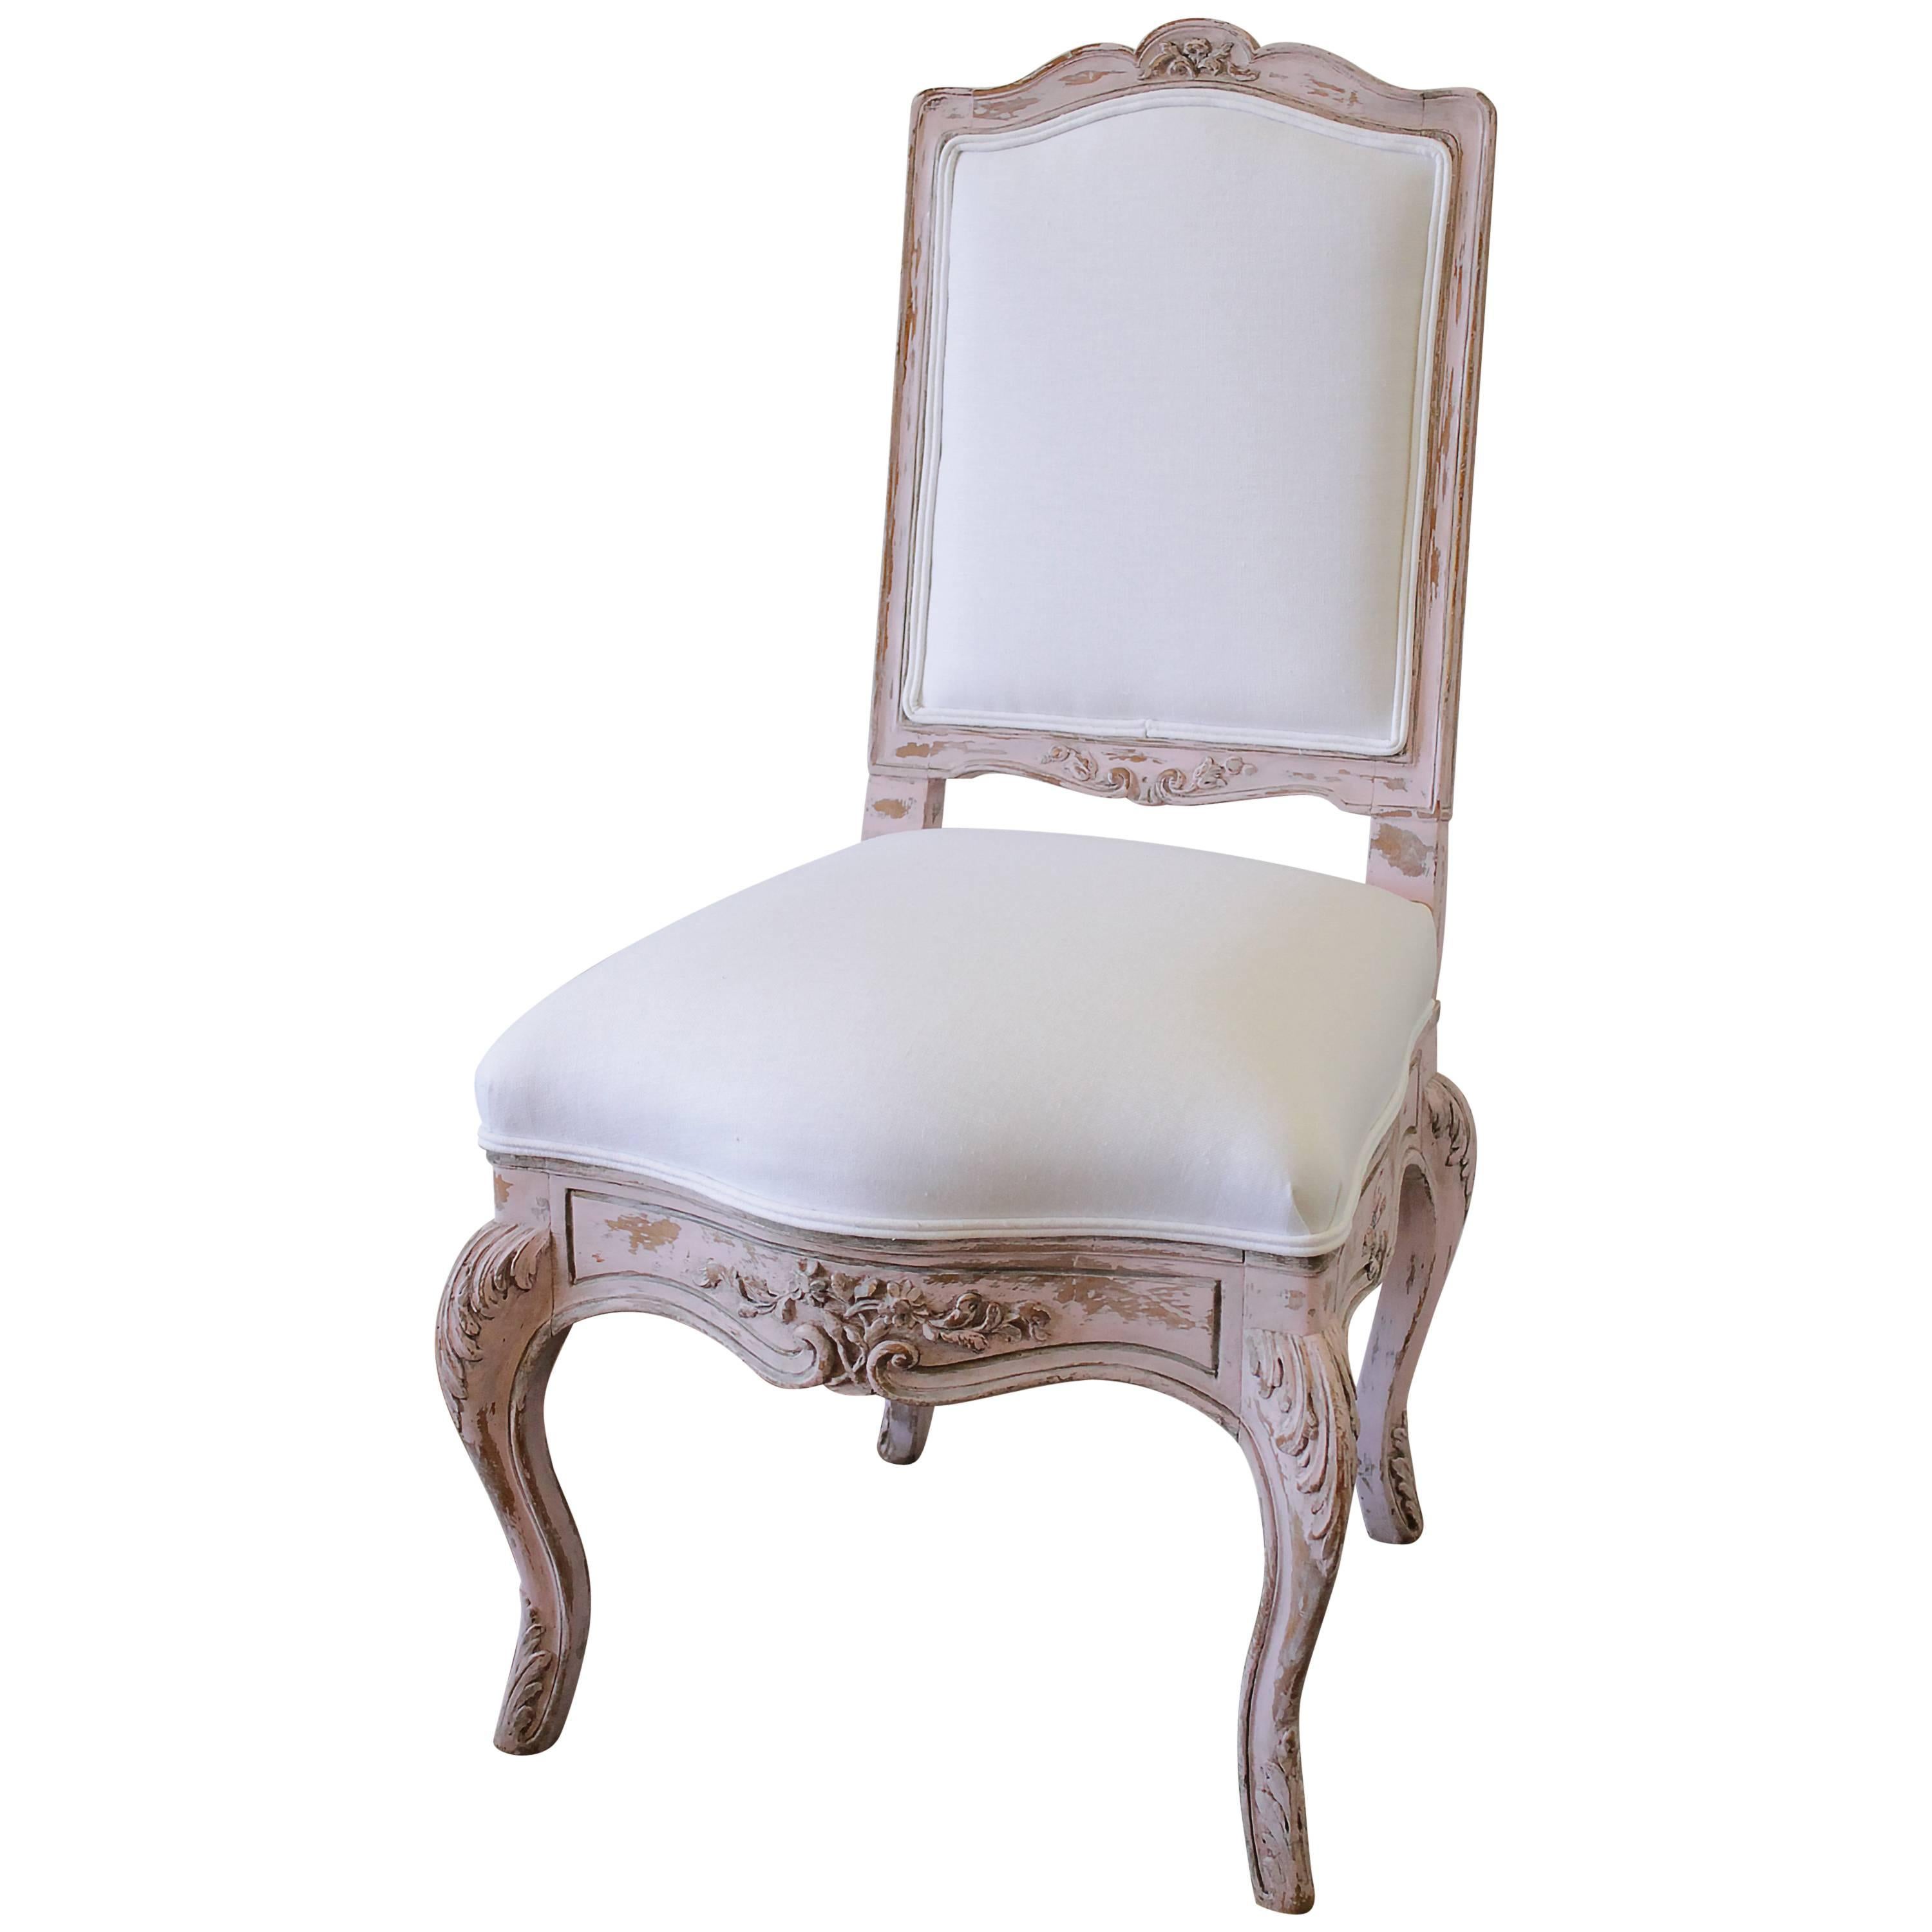 Antique French Vanity Chair Painted in a Pale Pink and White Belgian Linen For Sale